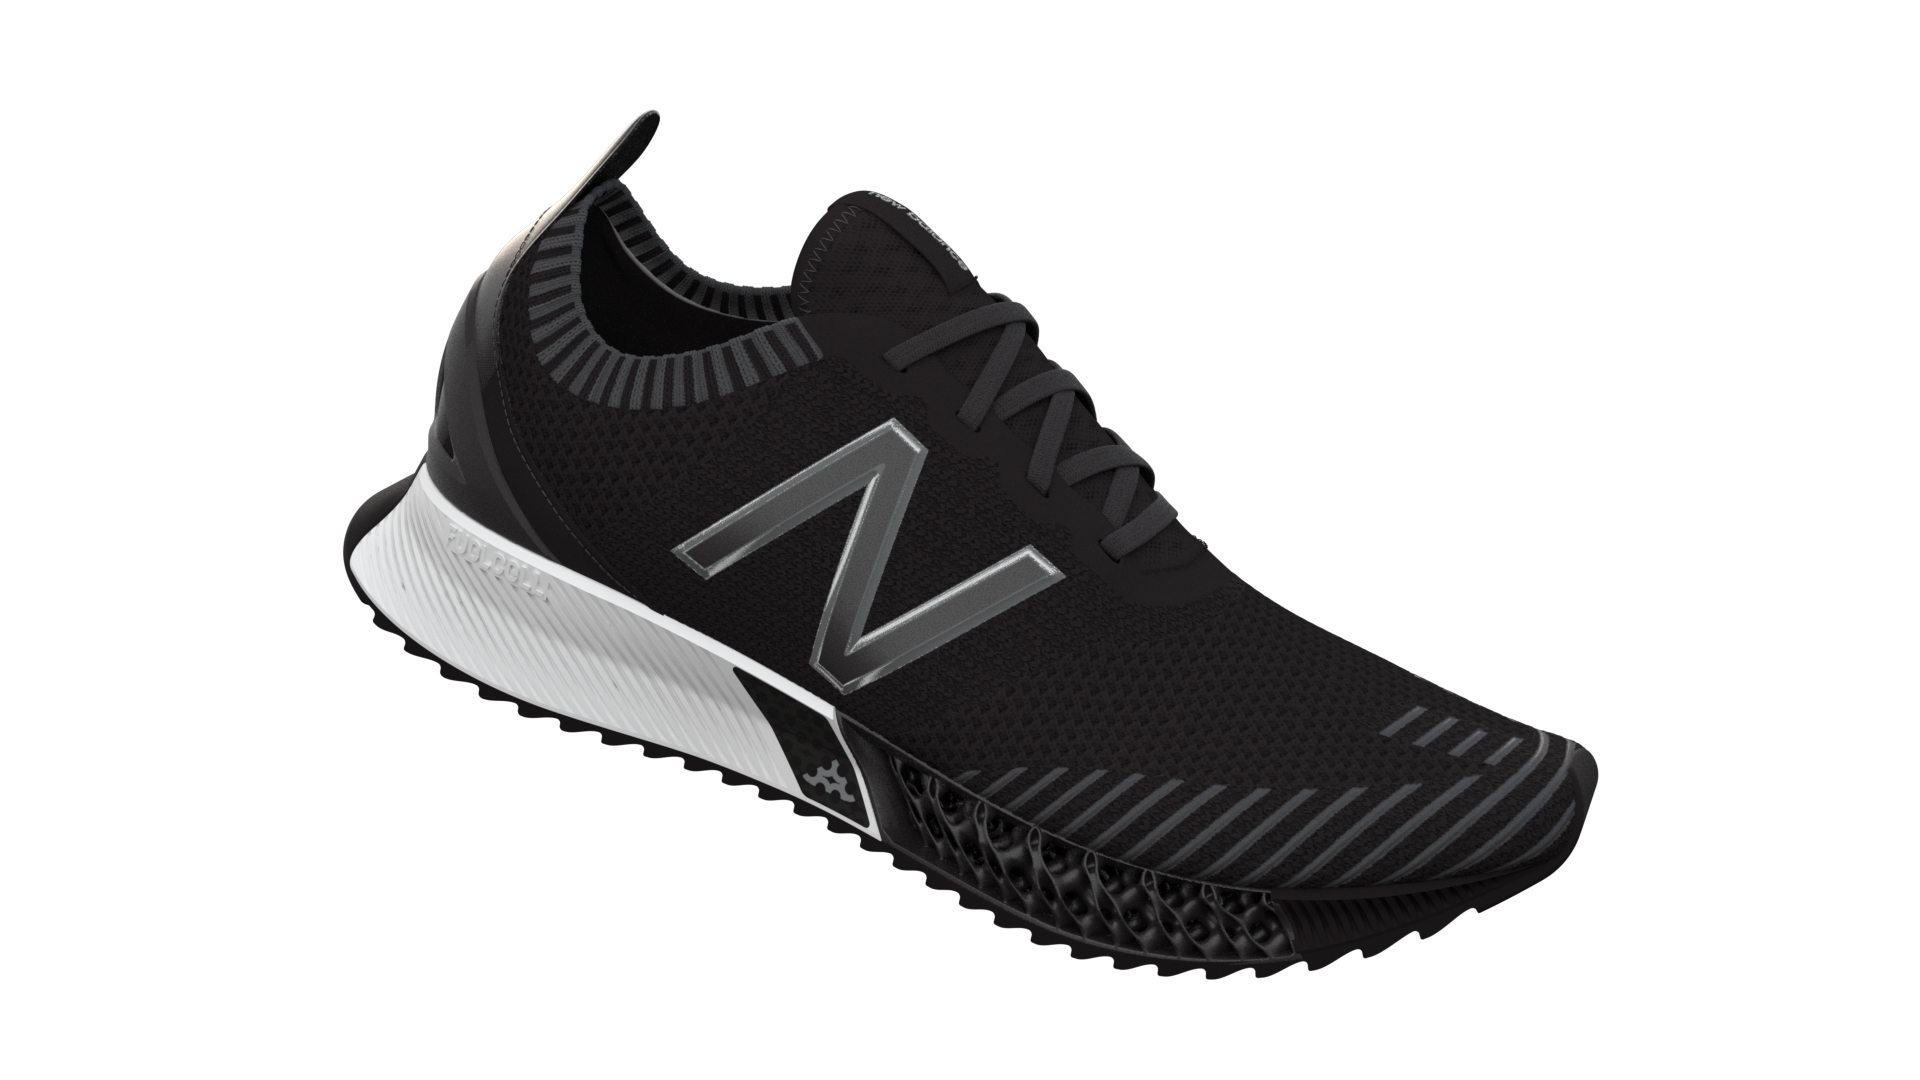 Lasers and 3D printing give New Balance’s new kicks their bounce